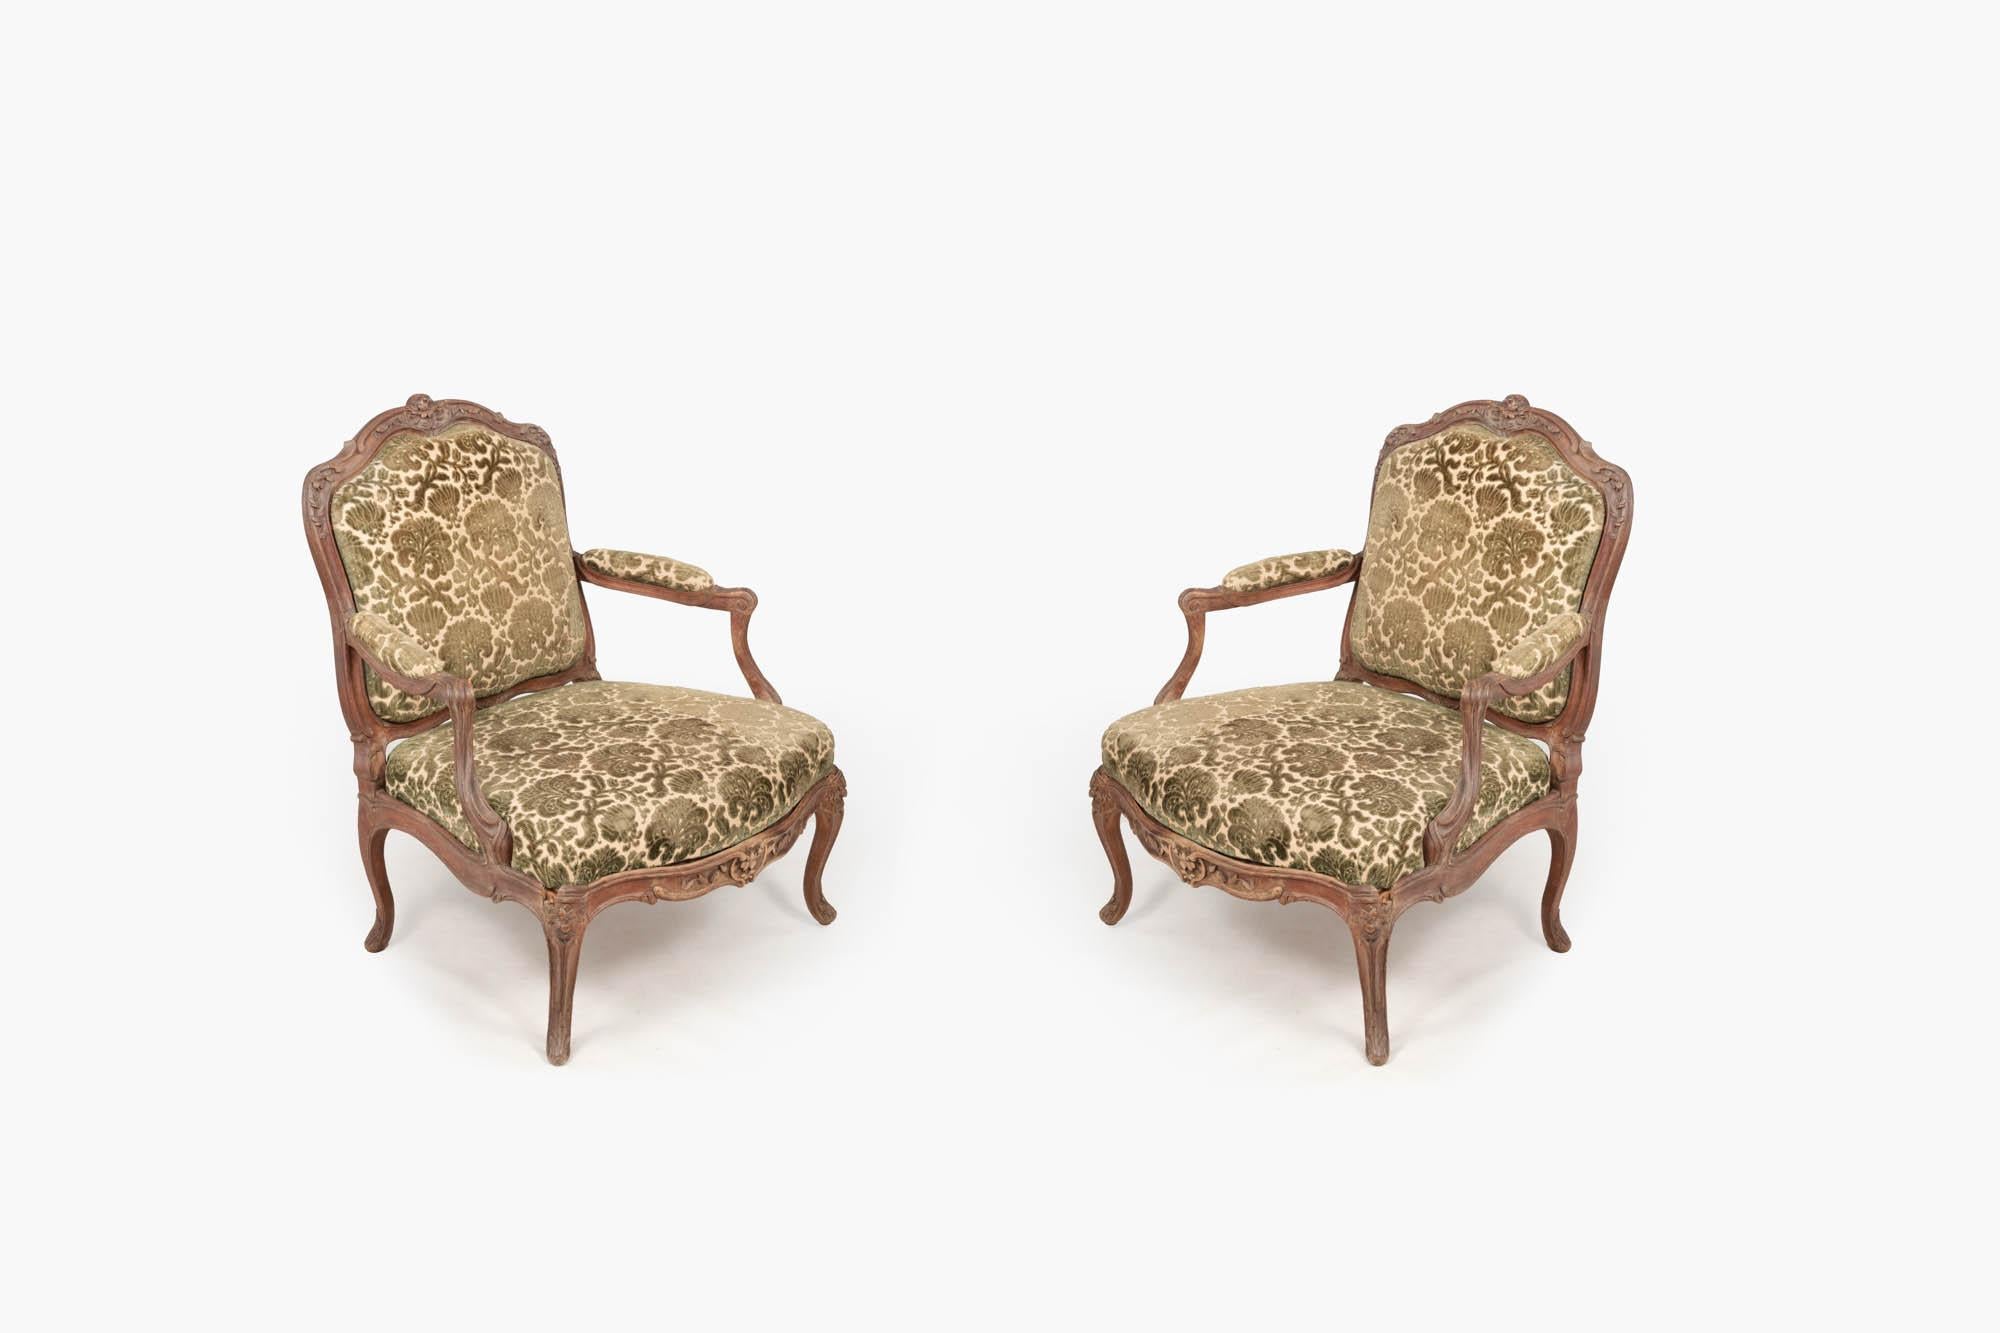 Pair 18th century French fauteuils in Louis XV style with cut velvet upholstery in fawn and green. The cartouche-shaped padded back, arms, and serpentine-fronted seats, with central floral motif on hipped cabriole legs.

This type of chair is